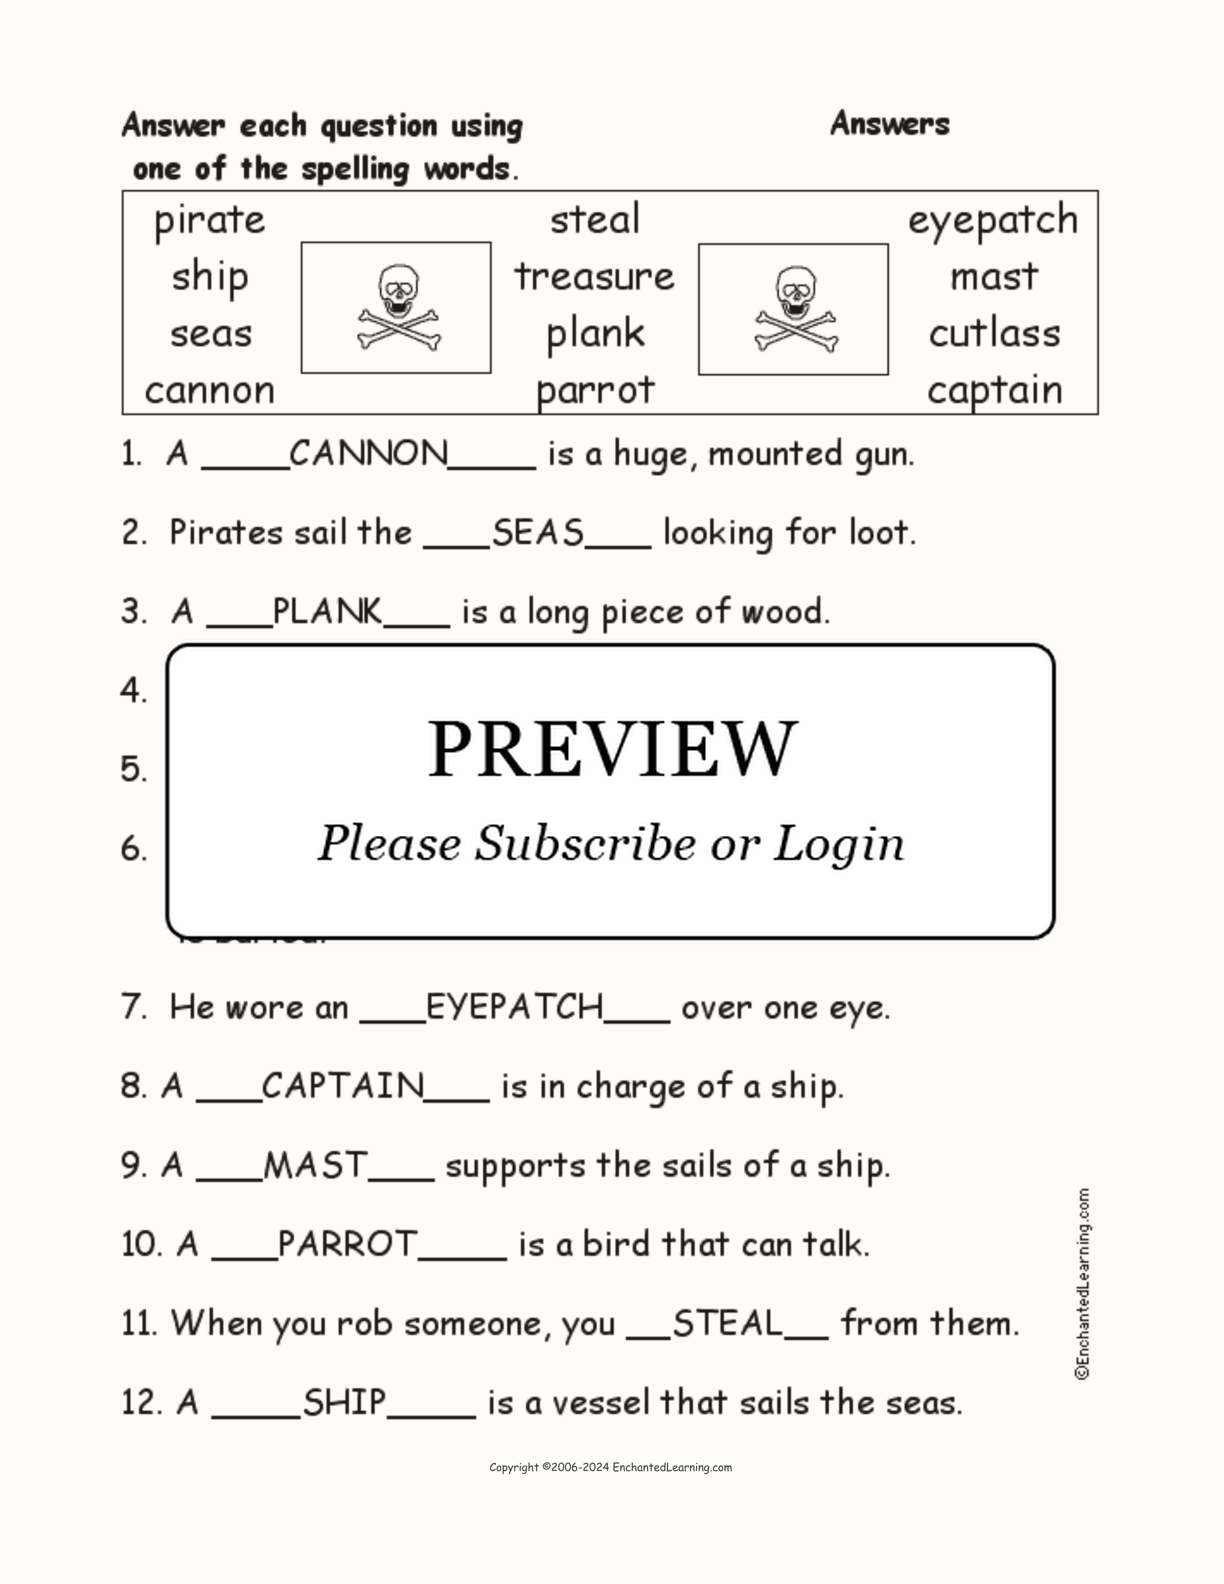 Pirate Spelling Word Questions interactive worksheet page 2